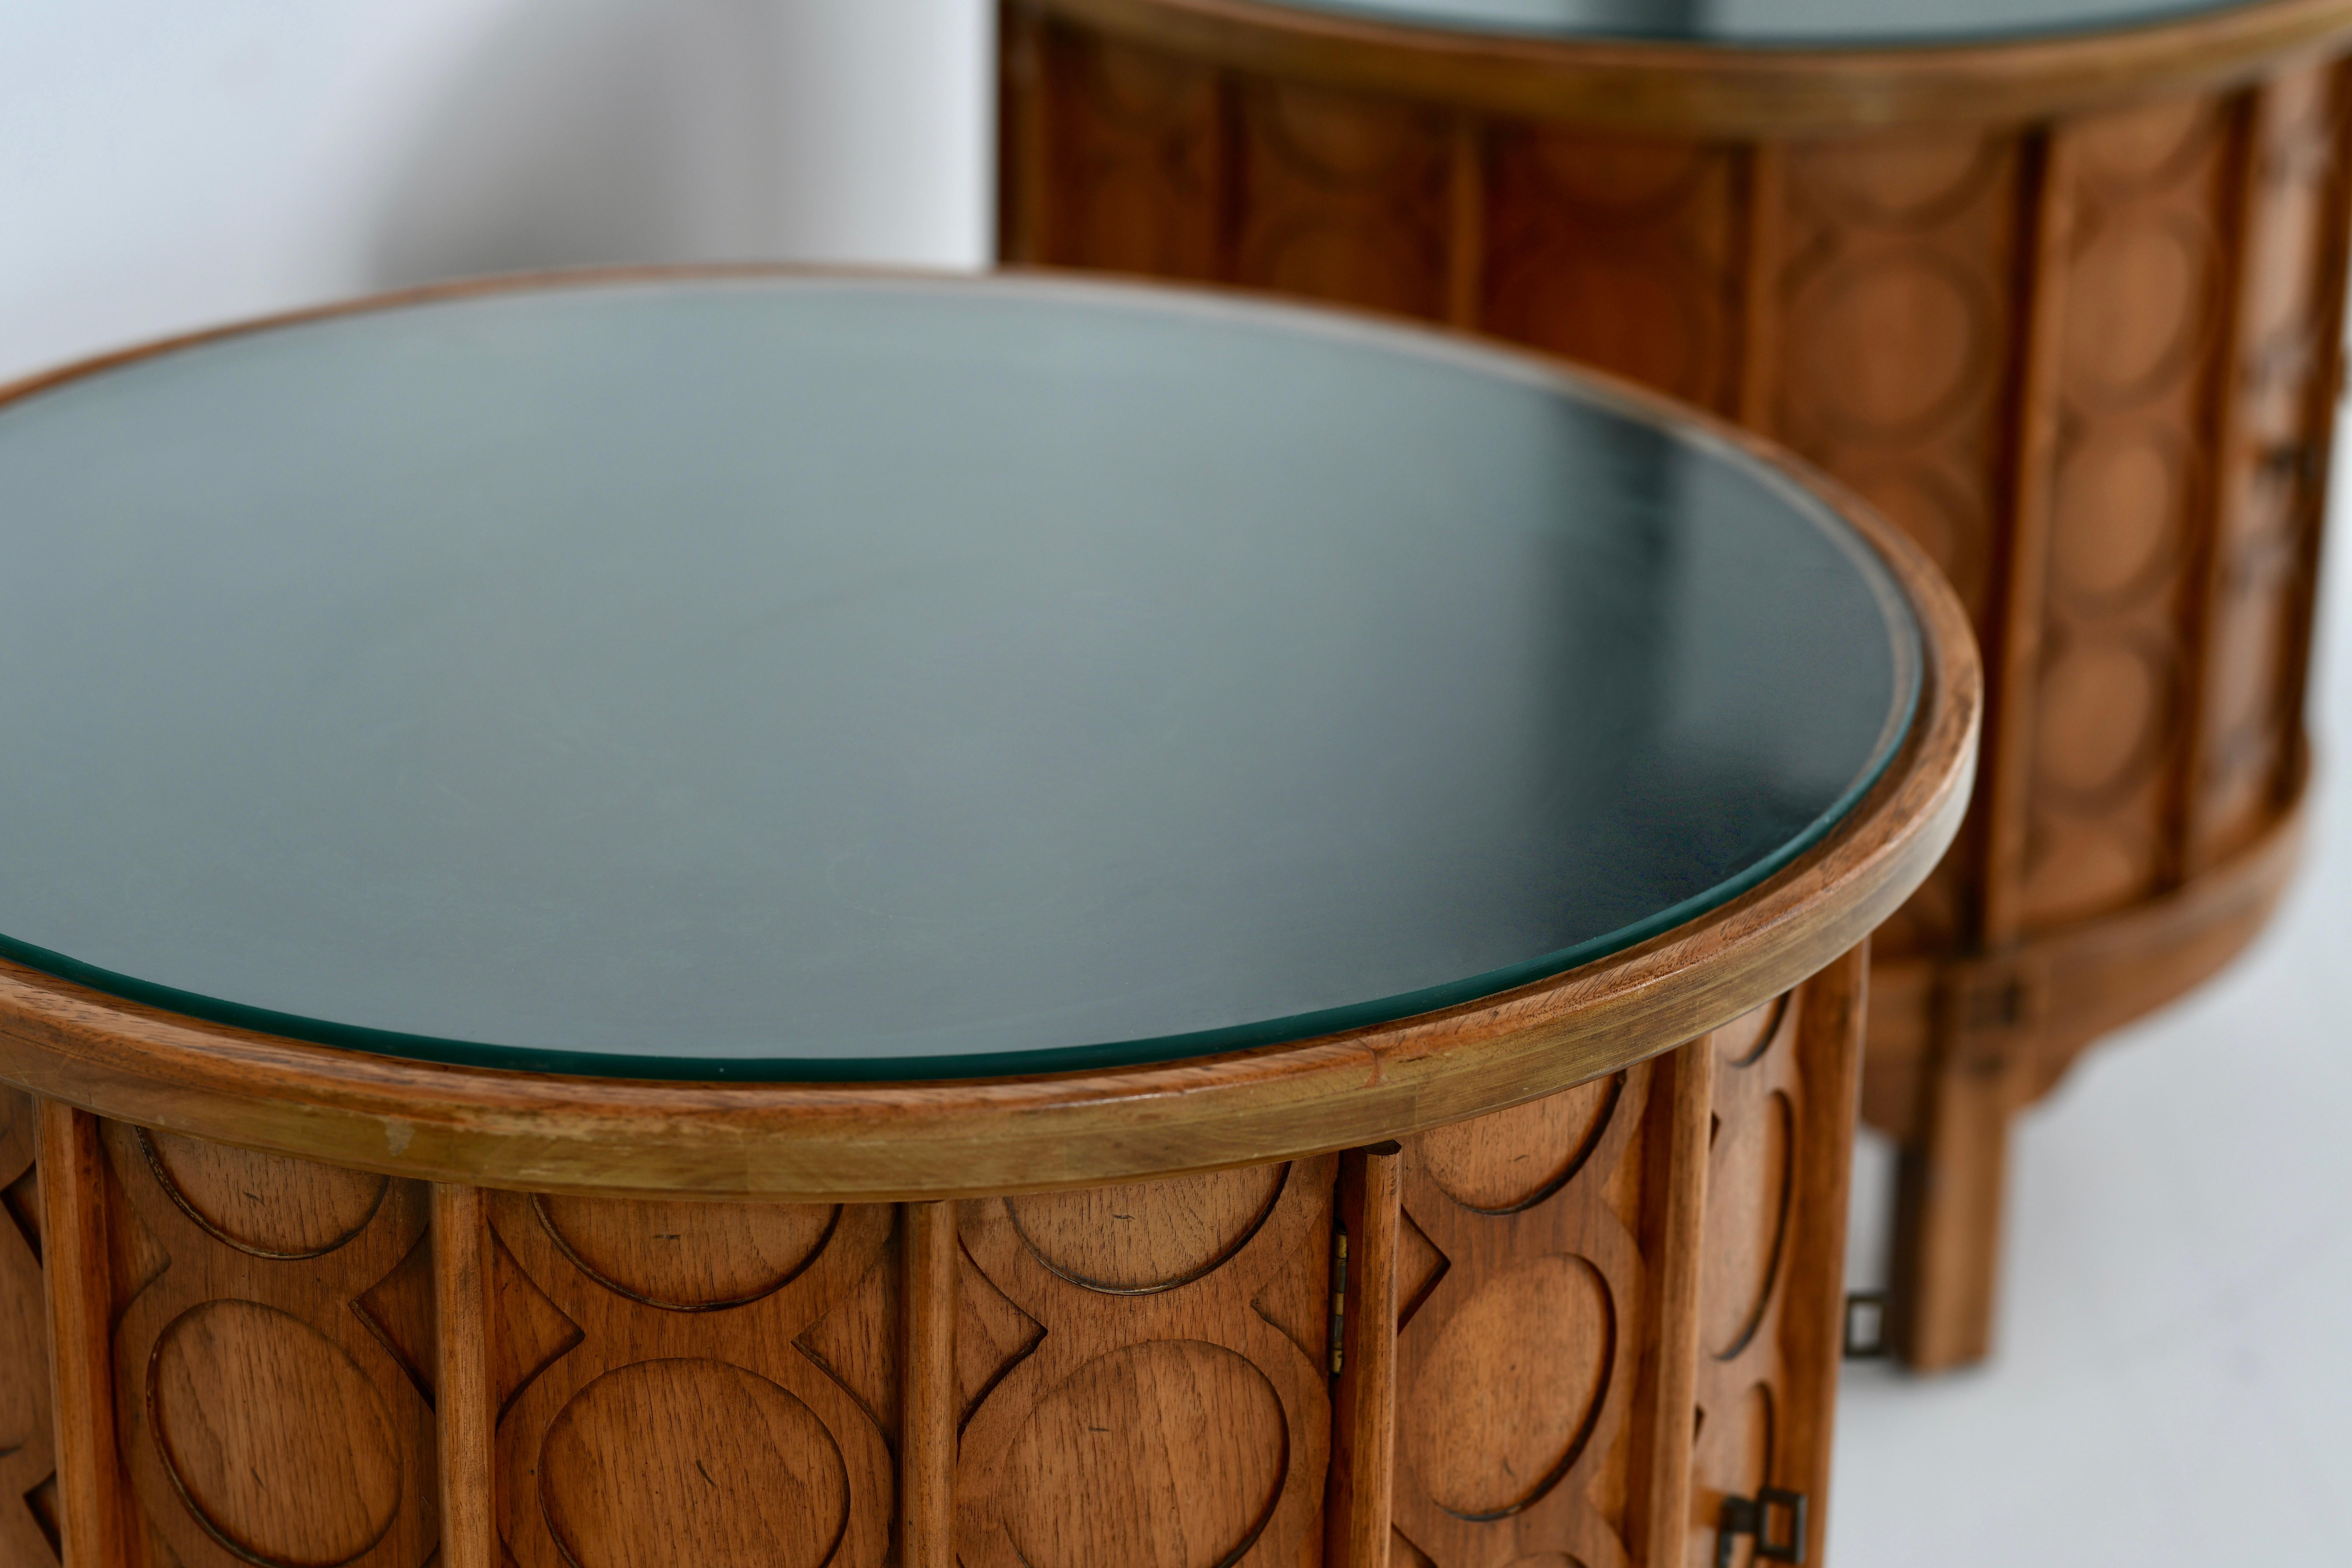 Thomasville drum side tables with good patination to the walnut veneer. It has a ebonized top with a glass insert thats removable. It has two doors with original bronzed hard ware. A piece of fine American craftsmanship from the 1960s.